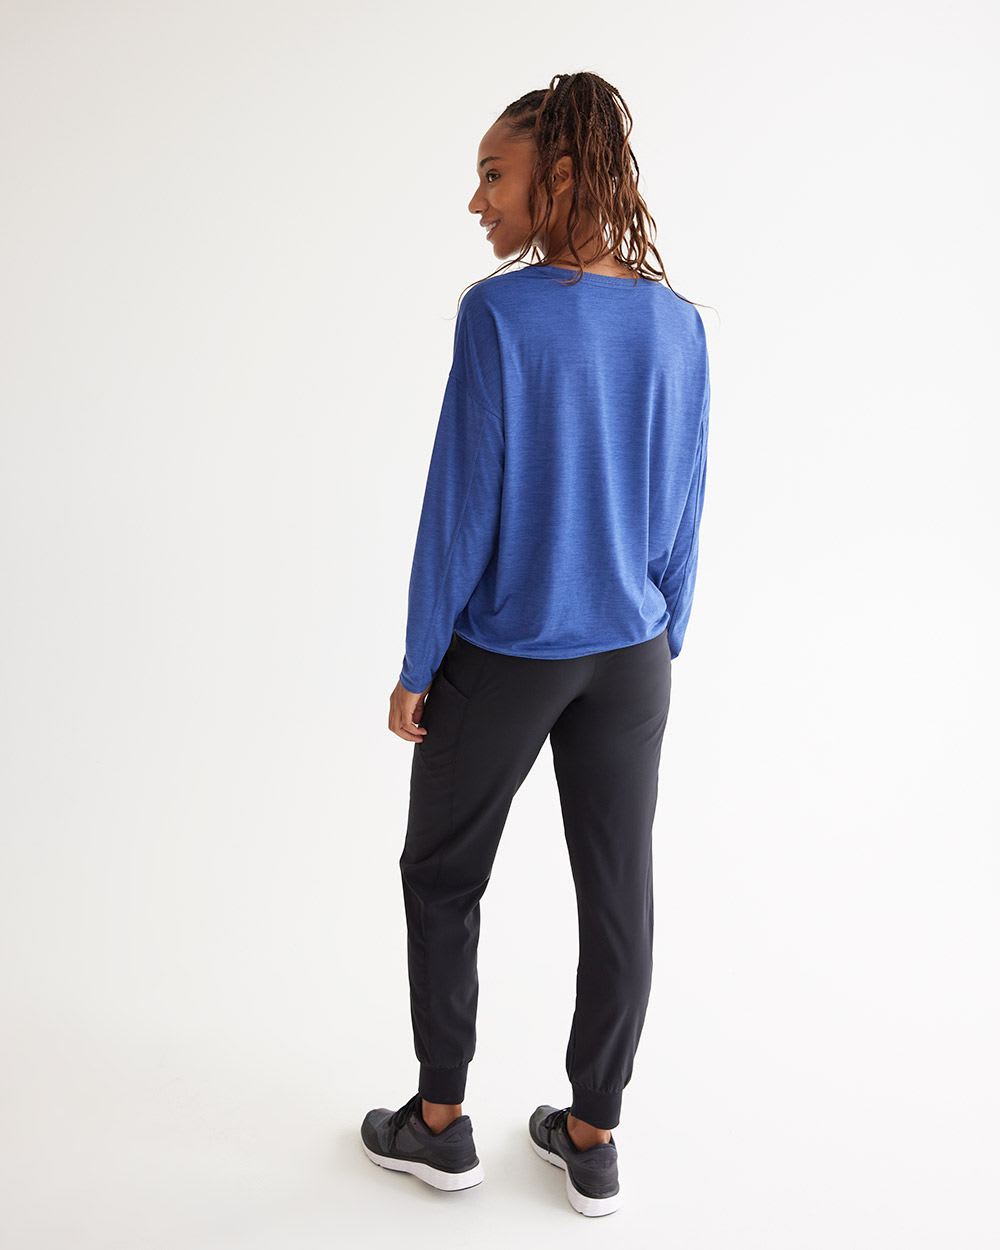 Long-Sleeve Crew-Neck Tee with Drawcord - Dry Lux Hyba